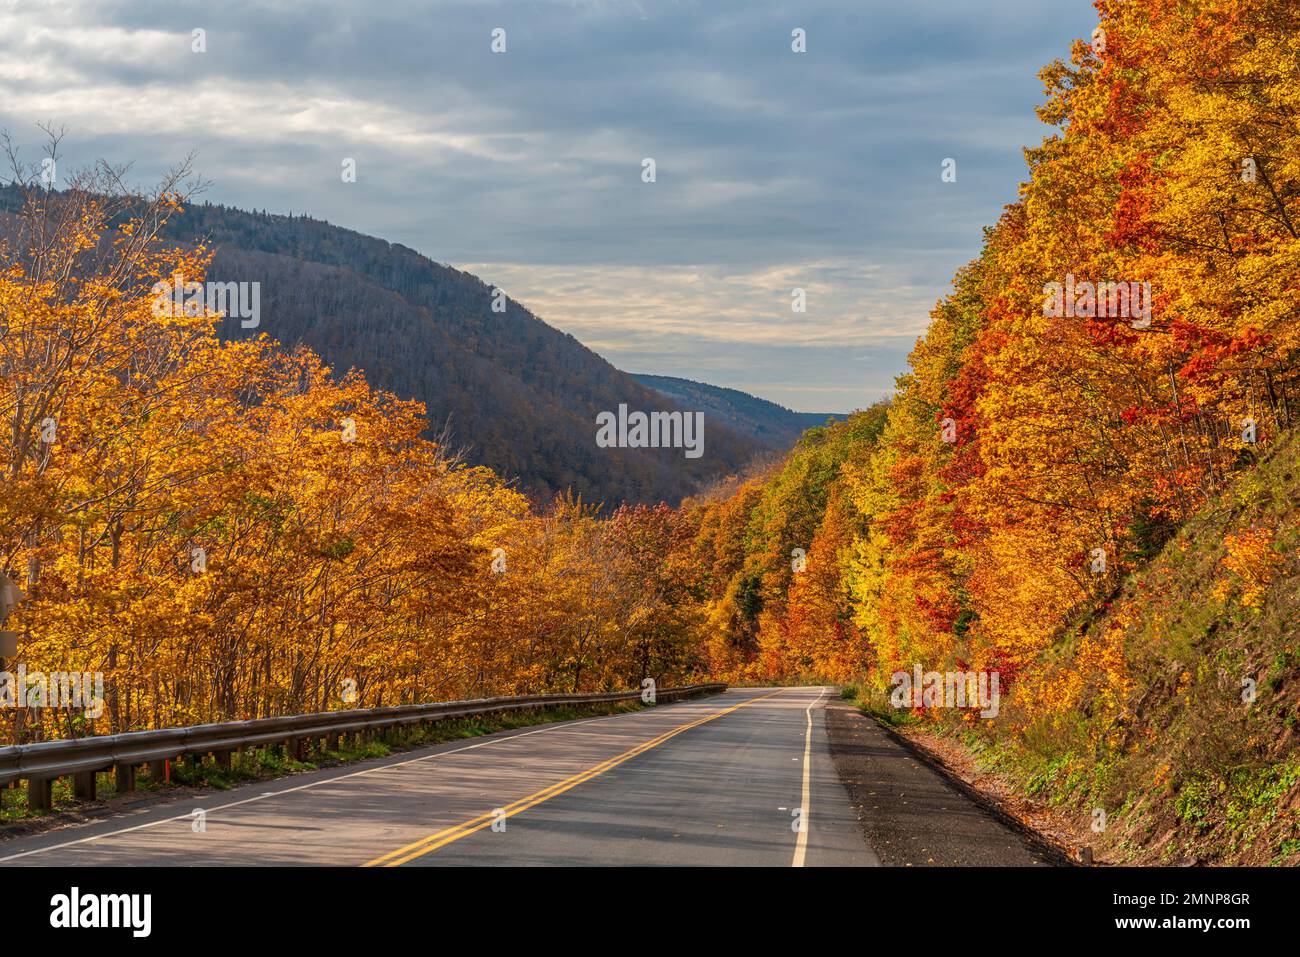 The Cabot Trail And Fall Foliage Through Cape Breton Highlands National